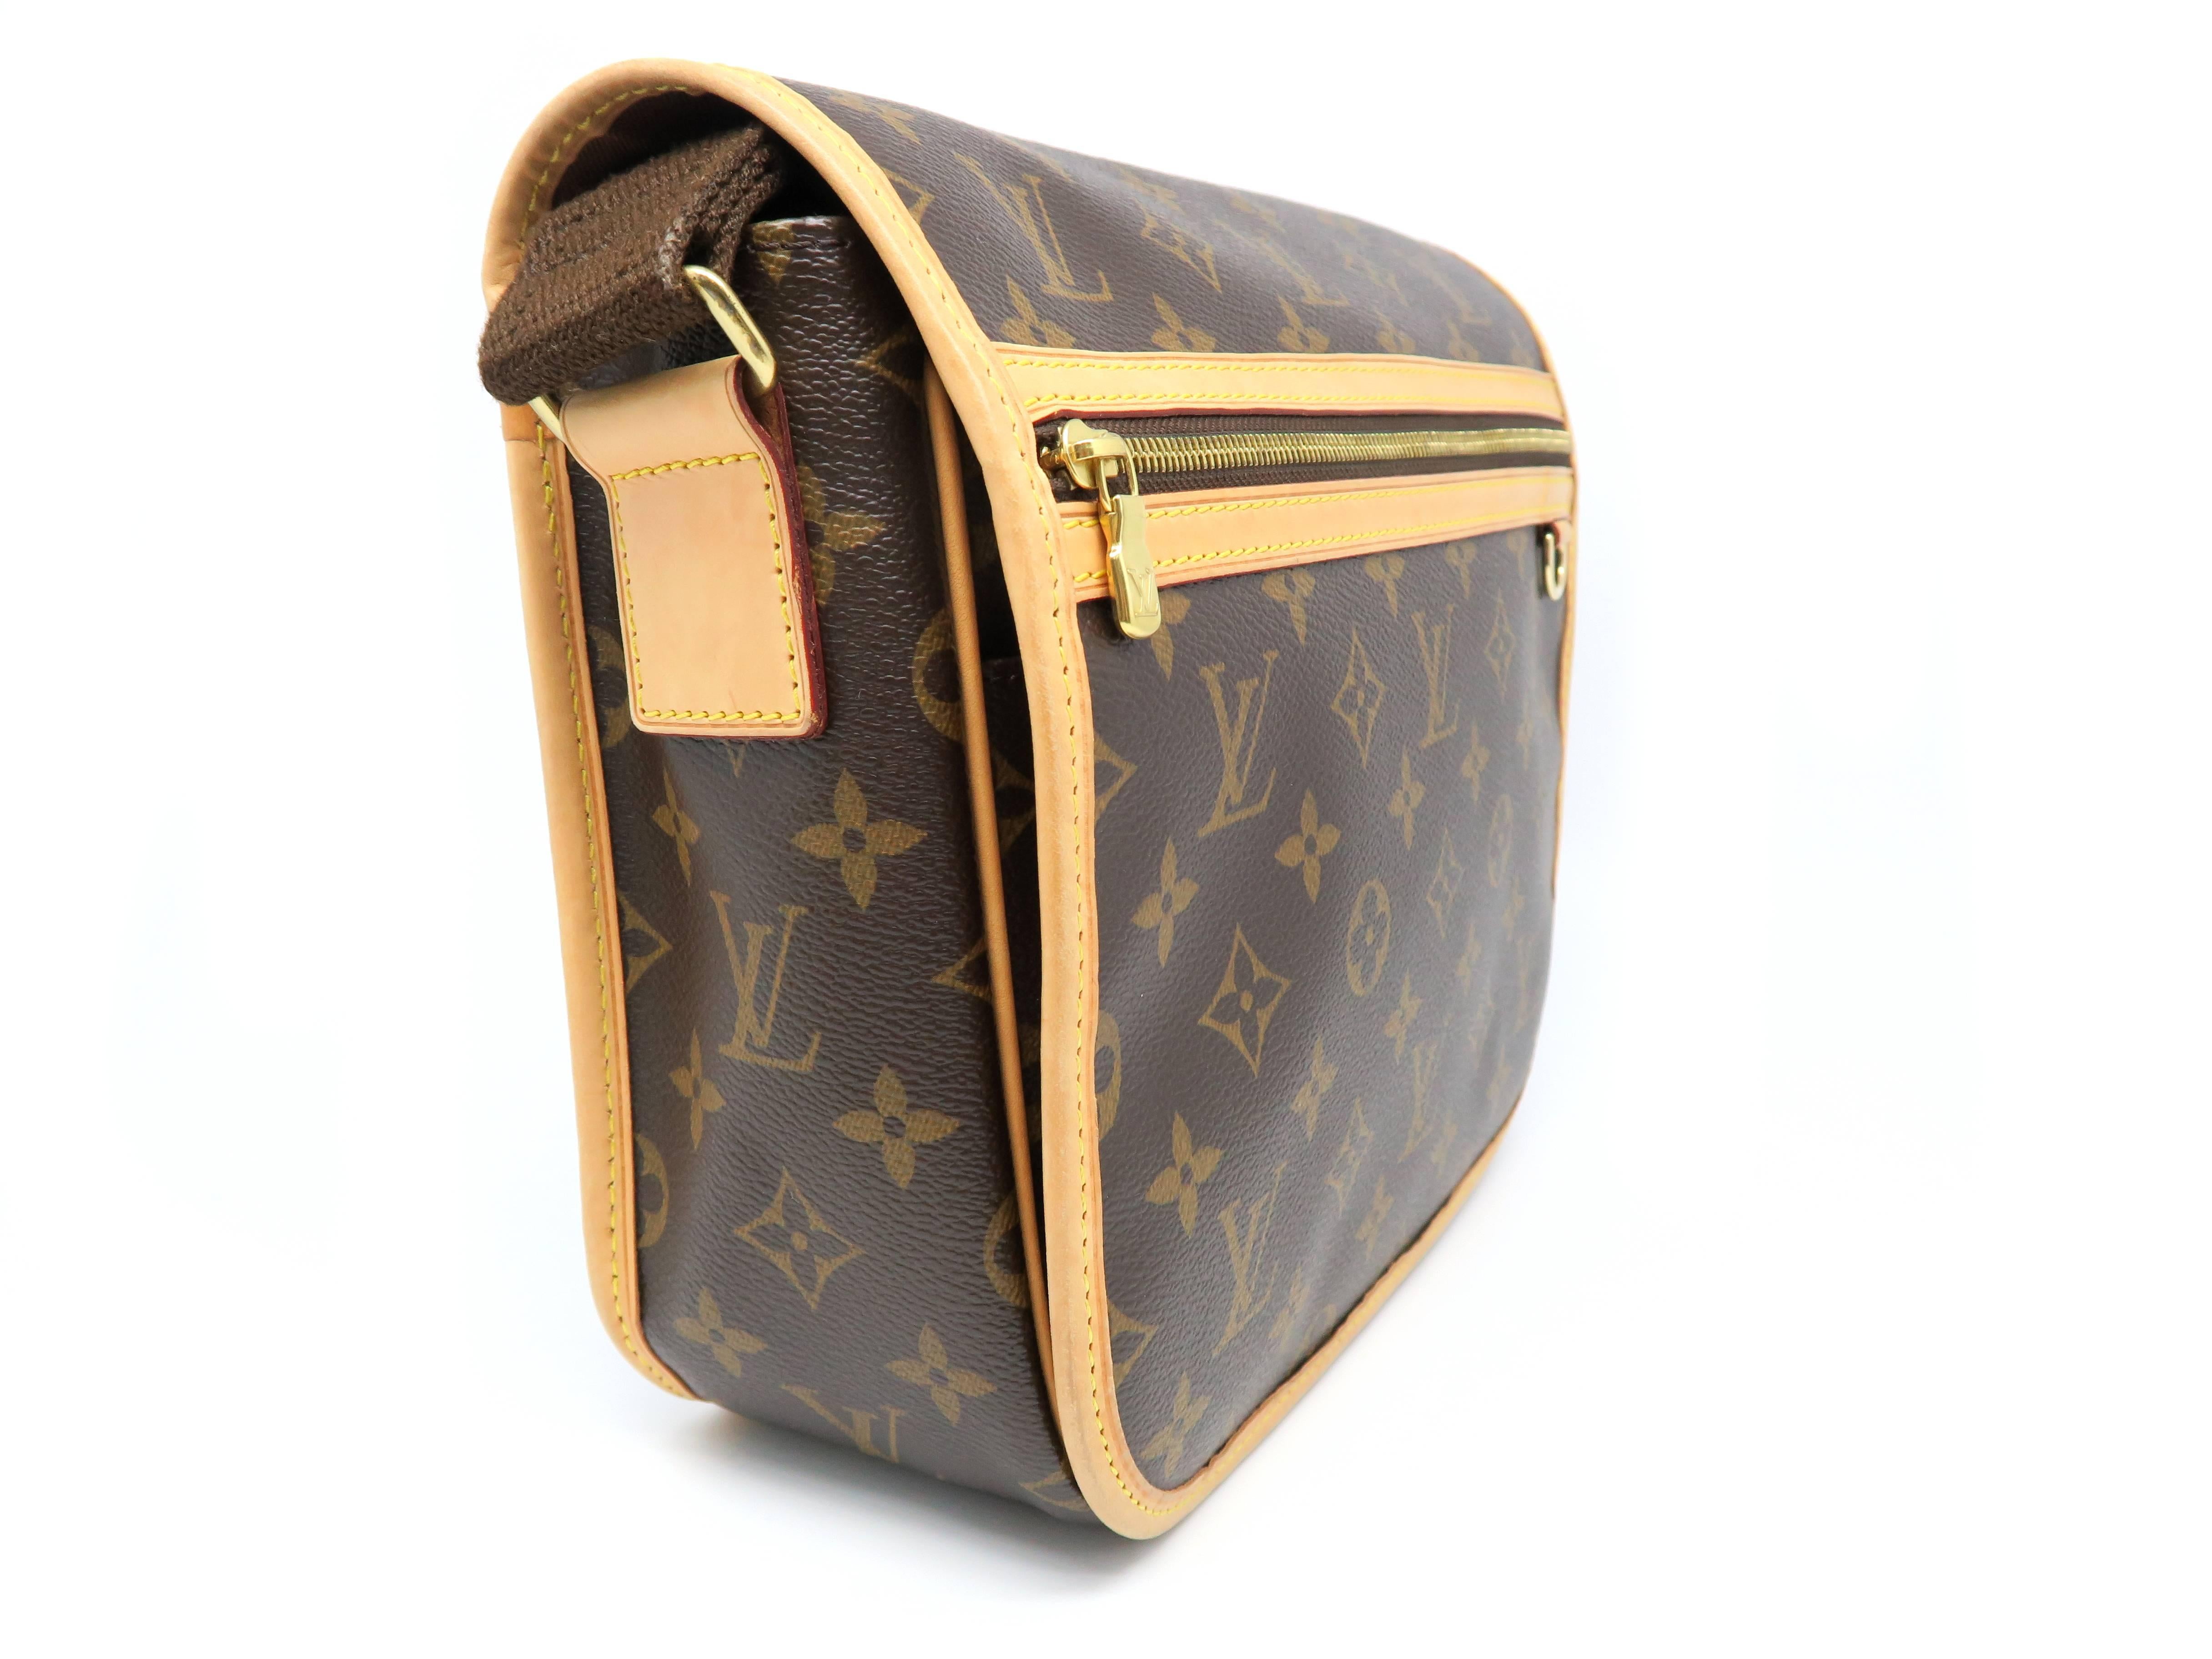 Color: Brown

Material: Monogram Canvas

Condition: Rank A
Overall: Good, few minor defects
Surface: Good
Corners: Minor Scratches 
Edges: Minor Scratches & Stains
Handles/Straps: Good
Hardware: Minor Scratches

Dimensions: W25 × H24 ×